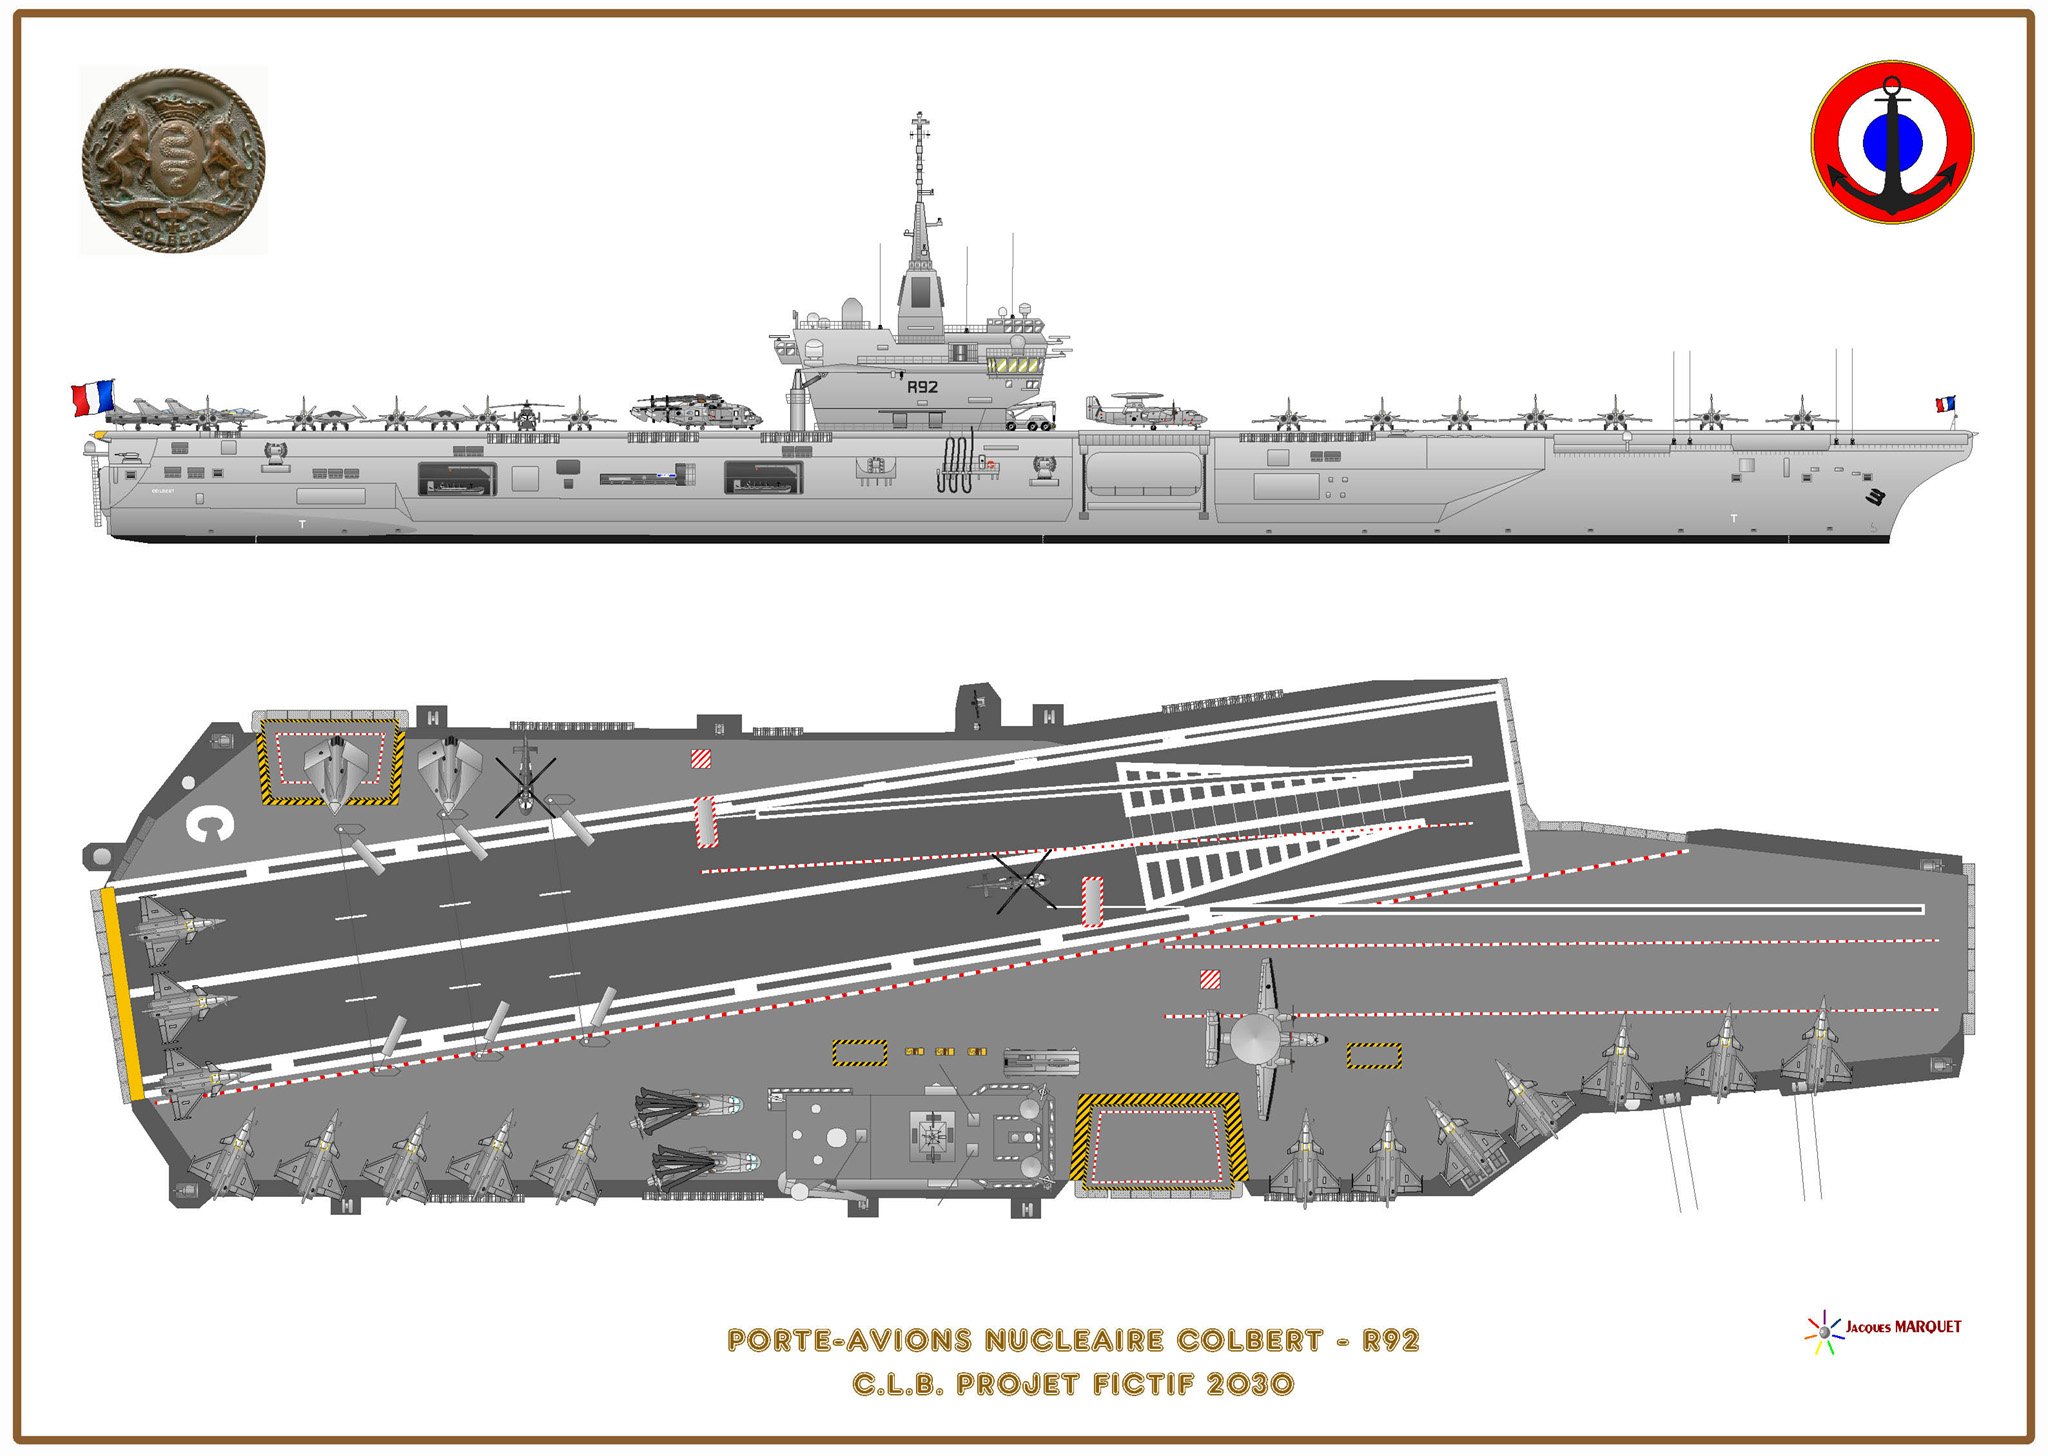 France Meets with Some Difficulties in Design of Its New Aircraft Carrier